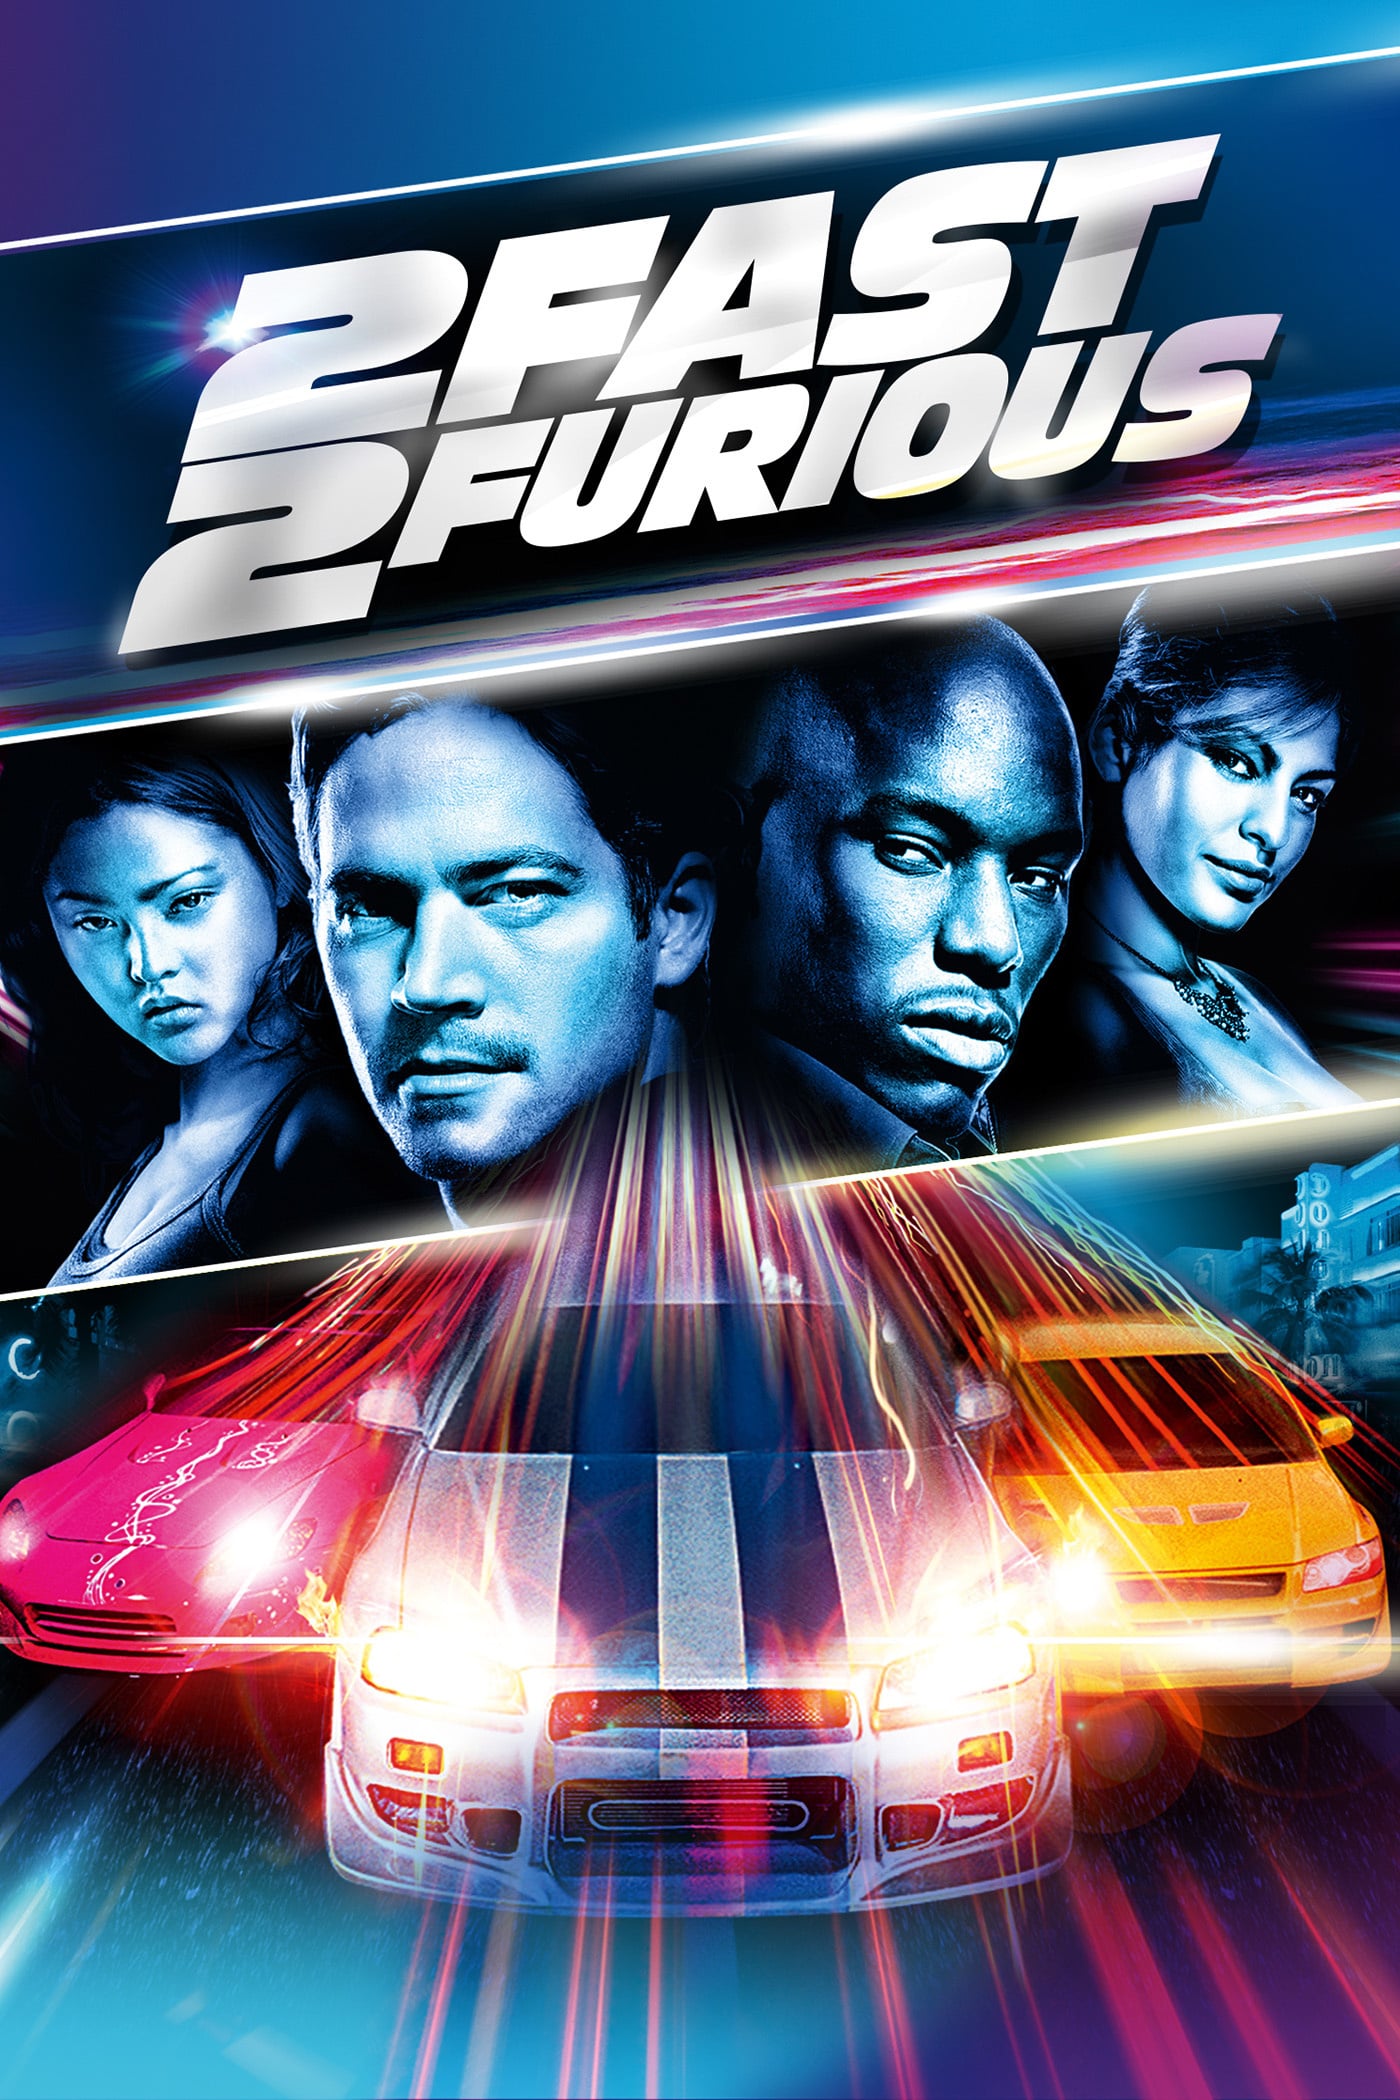 fast and furious 2 full movie in english free download hd 720p